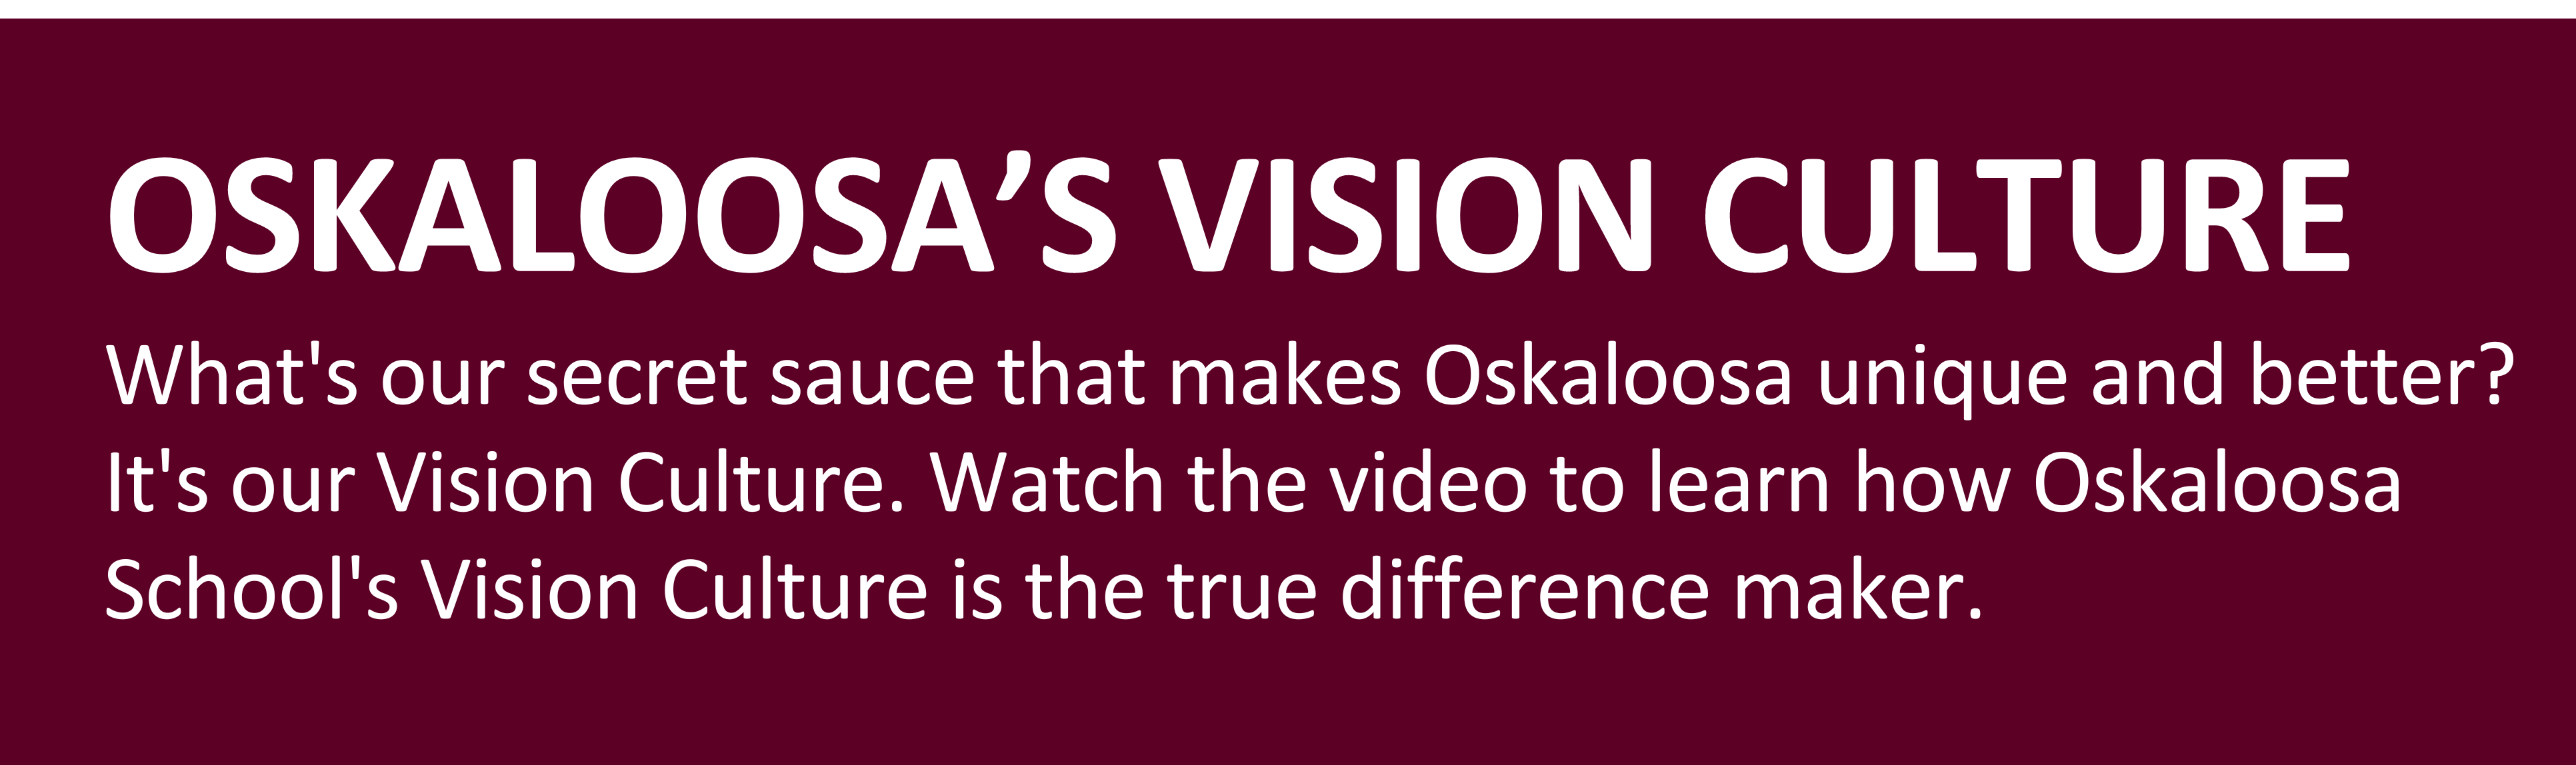 Oskaloosa's Vision Culture: What's our secret sauce that makes Oskaloosa unique and better?  It's our Vision Culture. Watch the video to learn how Oskaloosa School's Vision Culture is the true difference maker. 